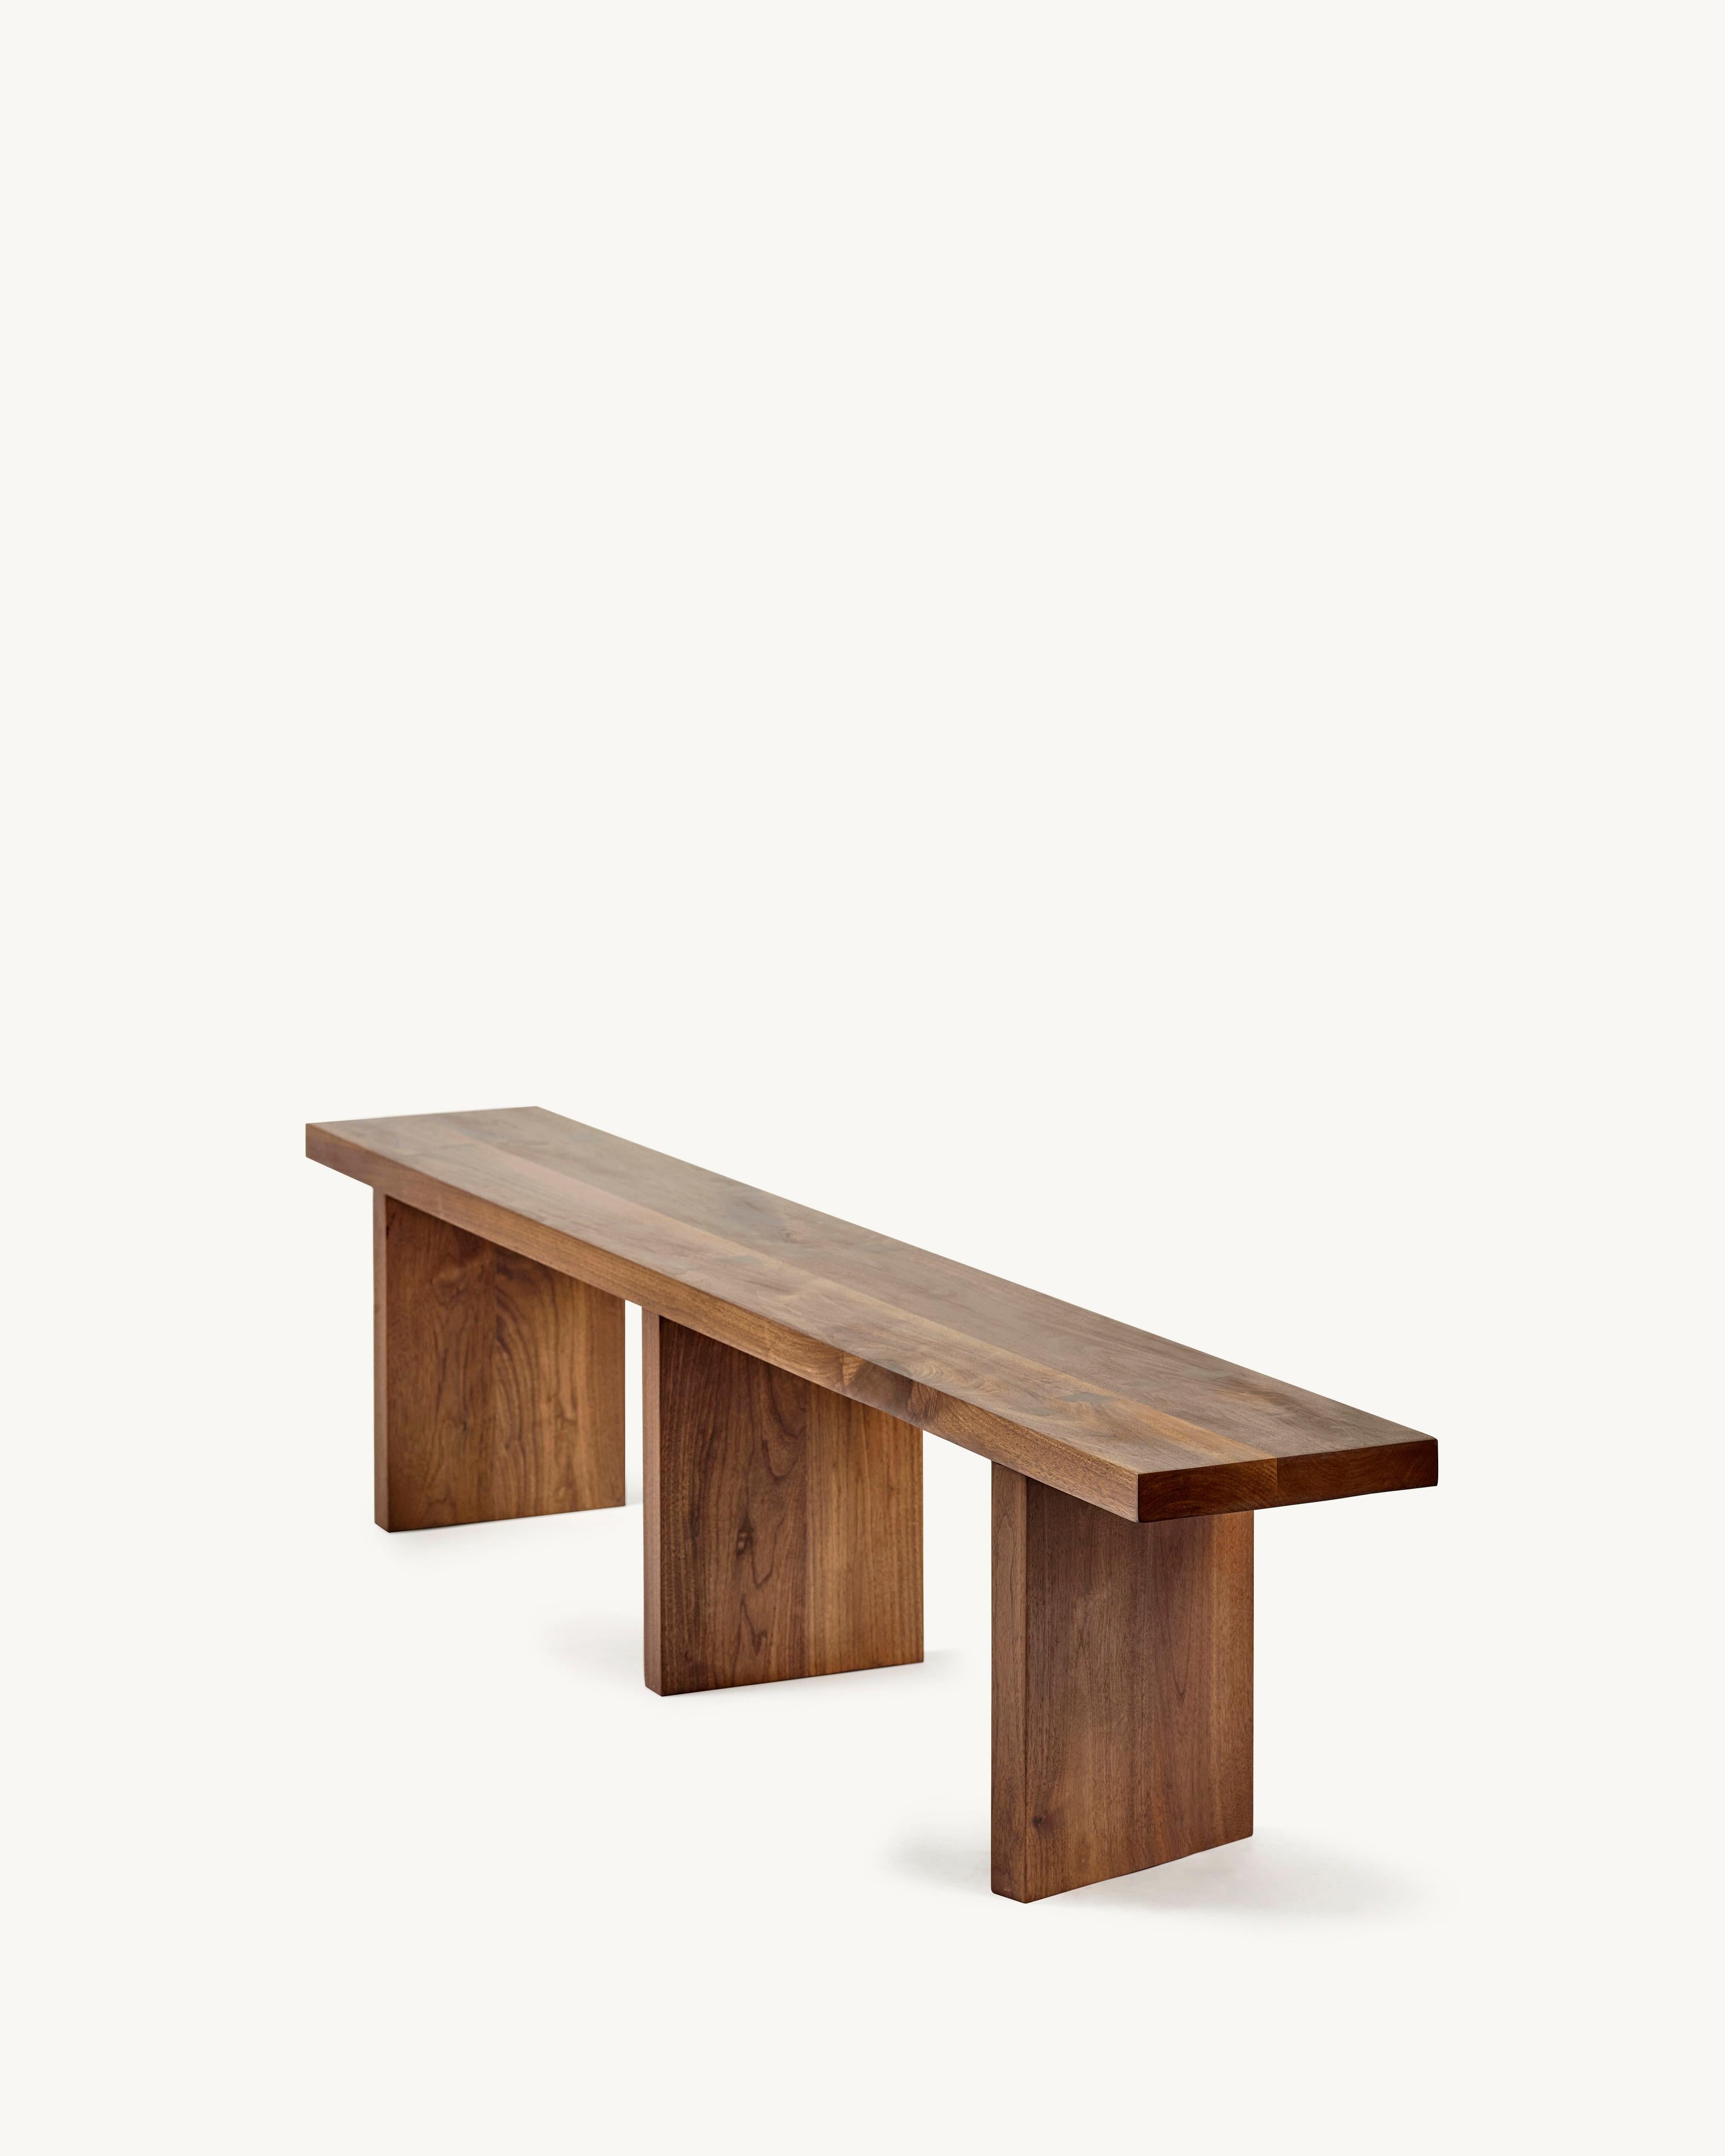 Bench in Walnut 'Solid' by Atelier 365 x Valerie Objects
Dimensions: H. 45 x W. 200 D. 35 (Large)

Fascinated by traditional wood joints, Greindl constructs wooden furniture without any nails or screws. Every joint is cut by hand, using chisels and